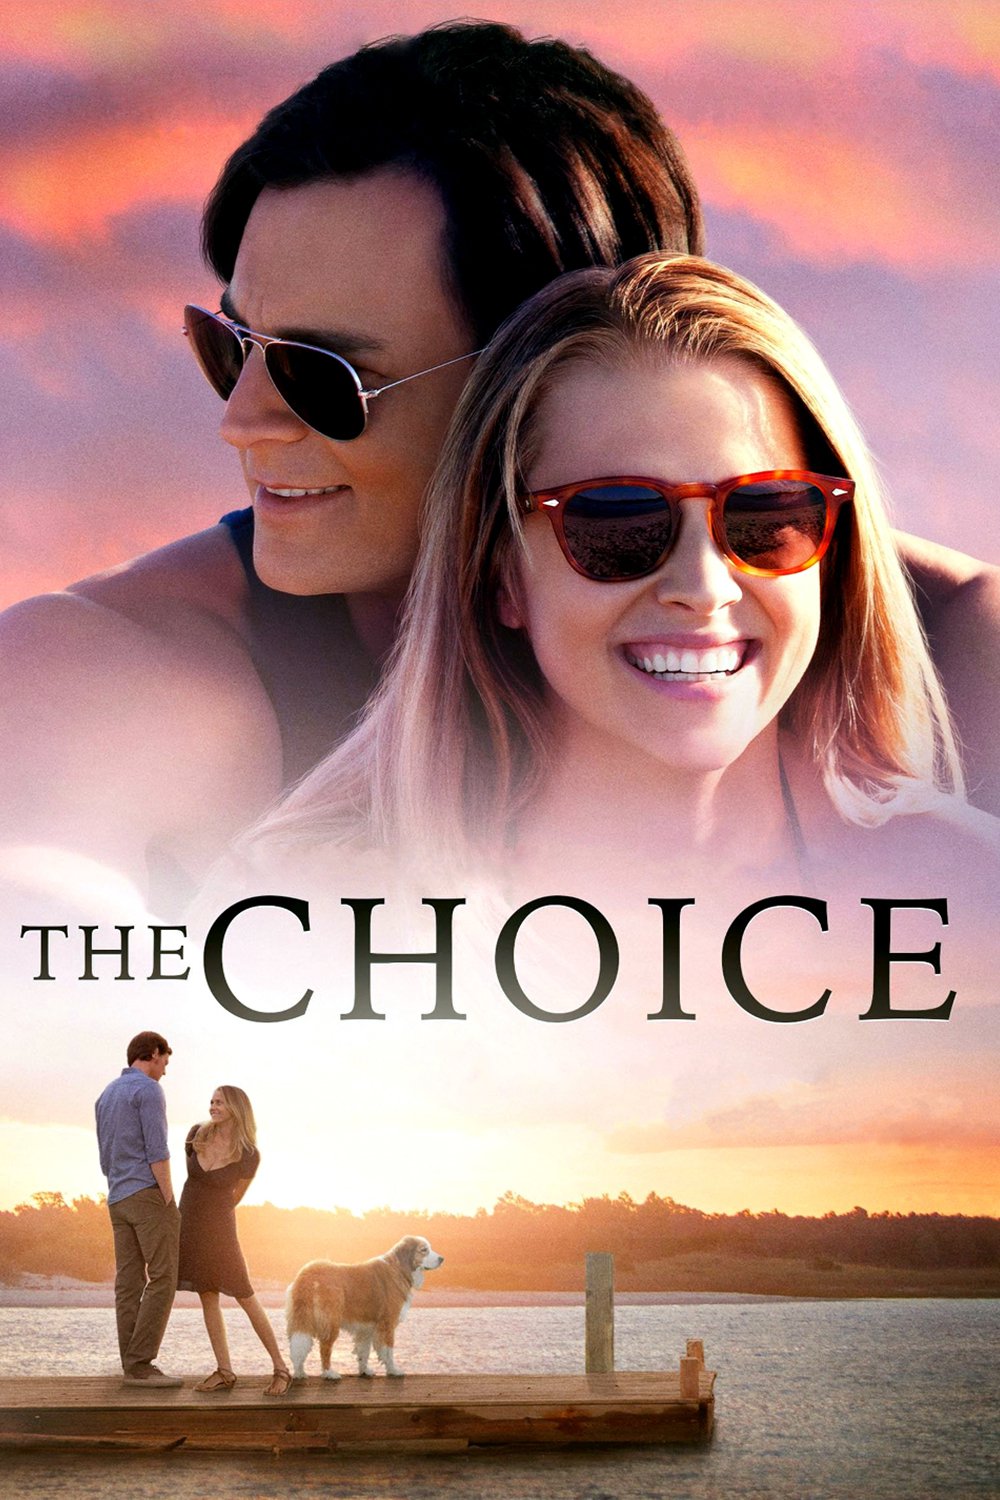 The Choice Poster - Choice Movie Poster - HD Wallpaper 